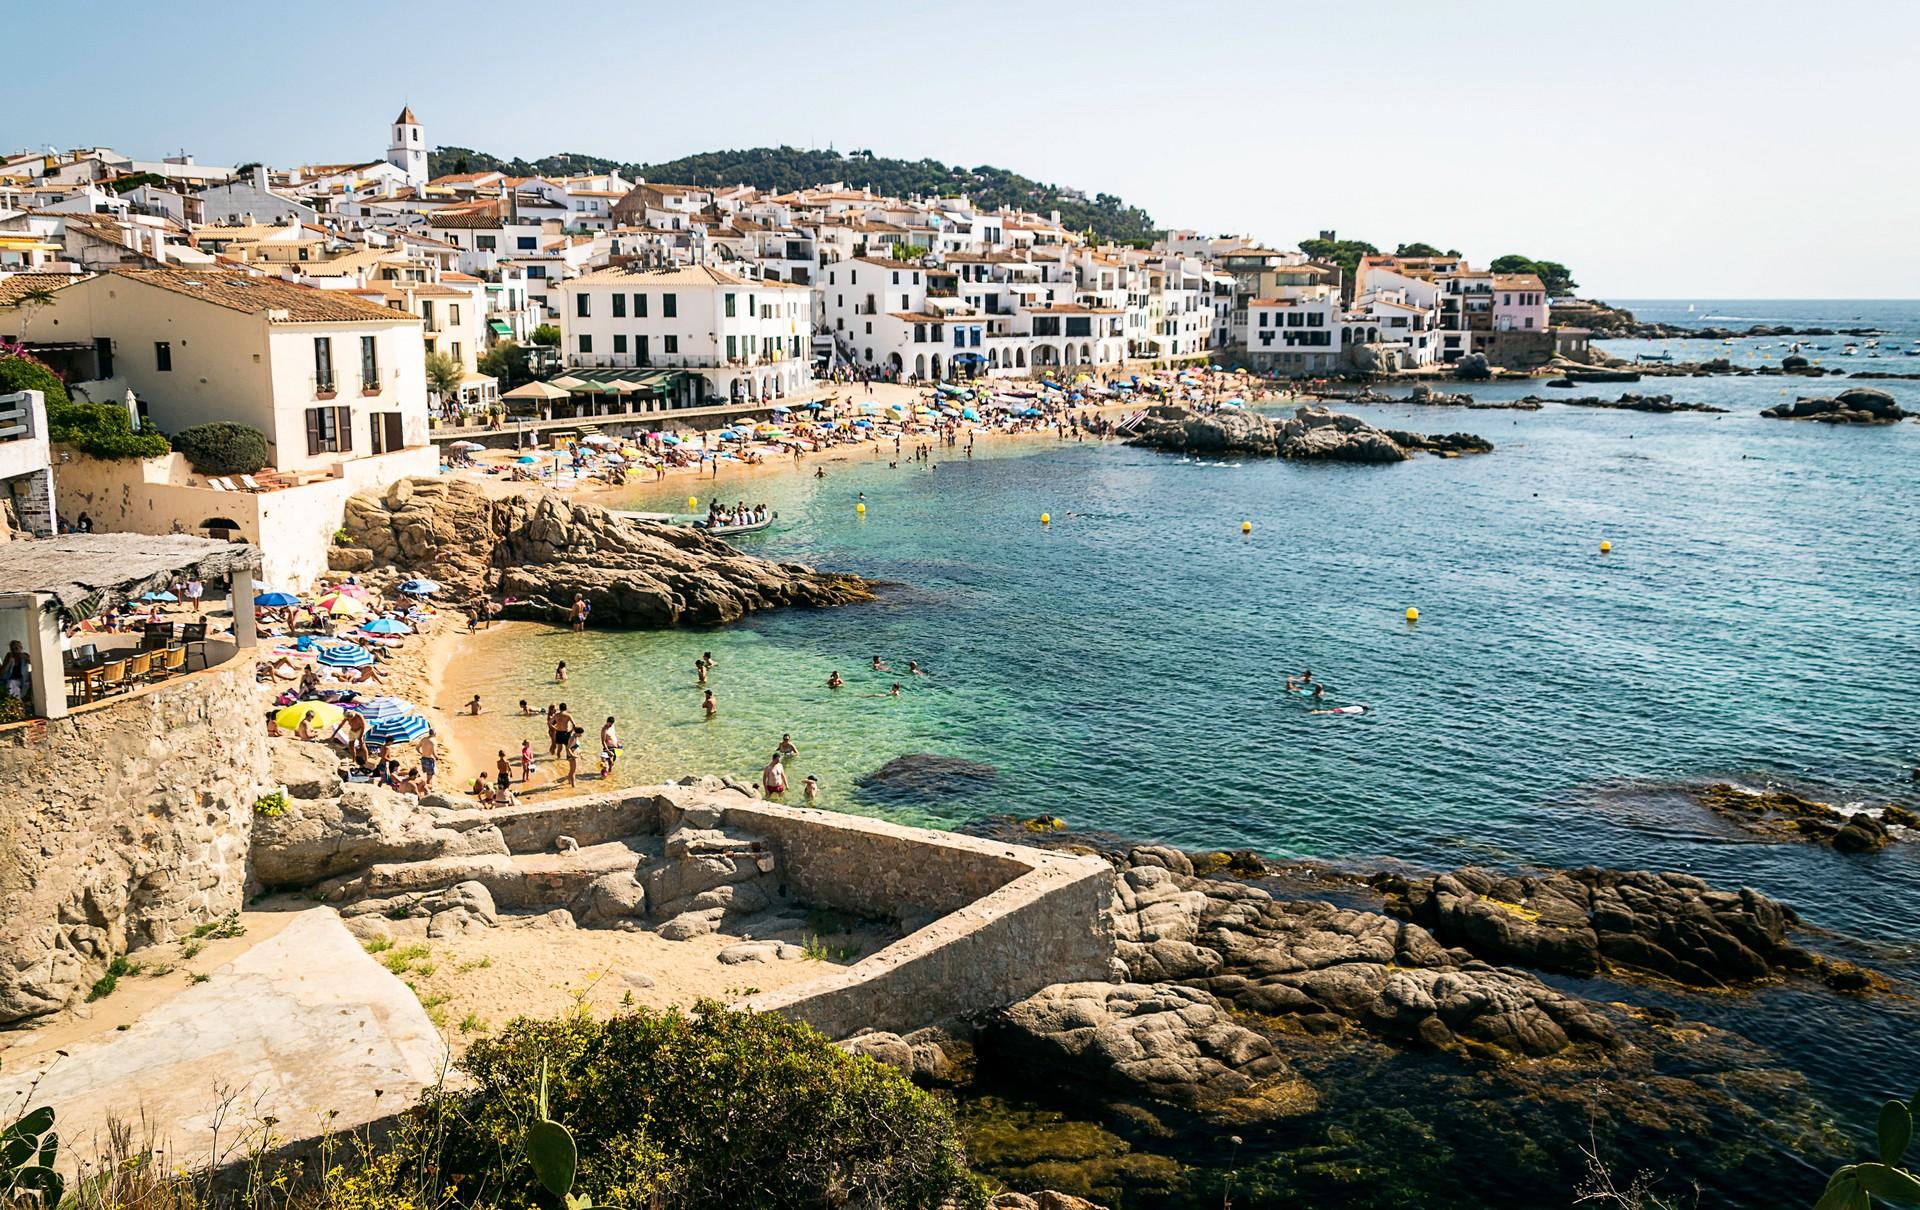 Beach with a lot of people and architecture in Calella de Palafrugell on a day with cloudy weather